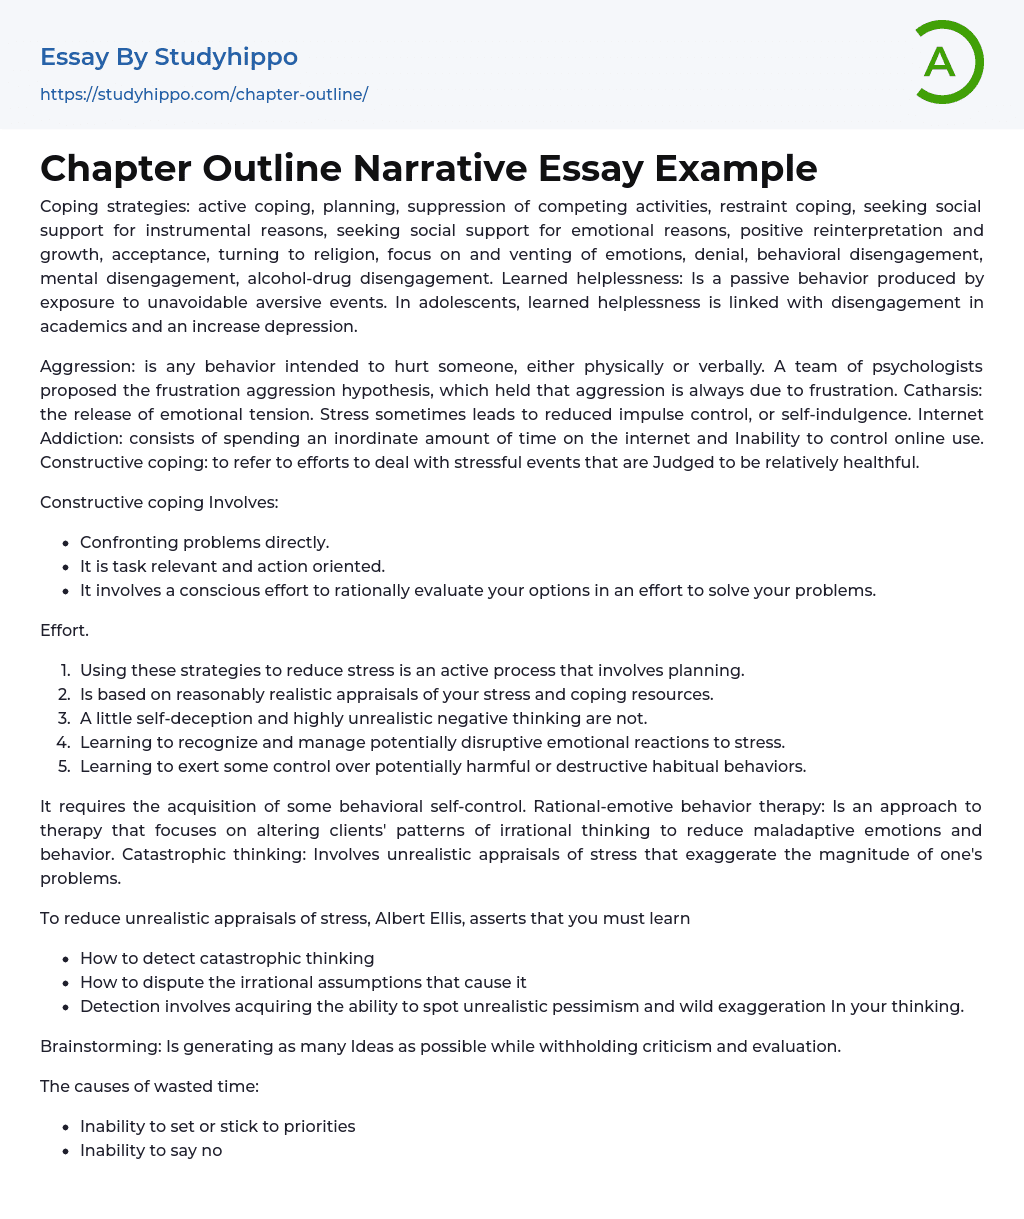 Chapter Outline Narrative Essay Example